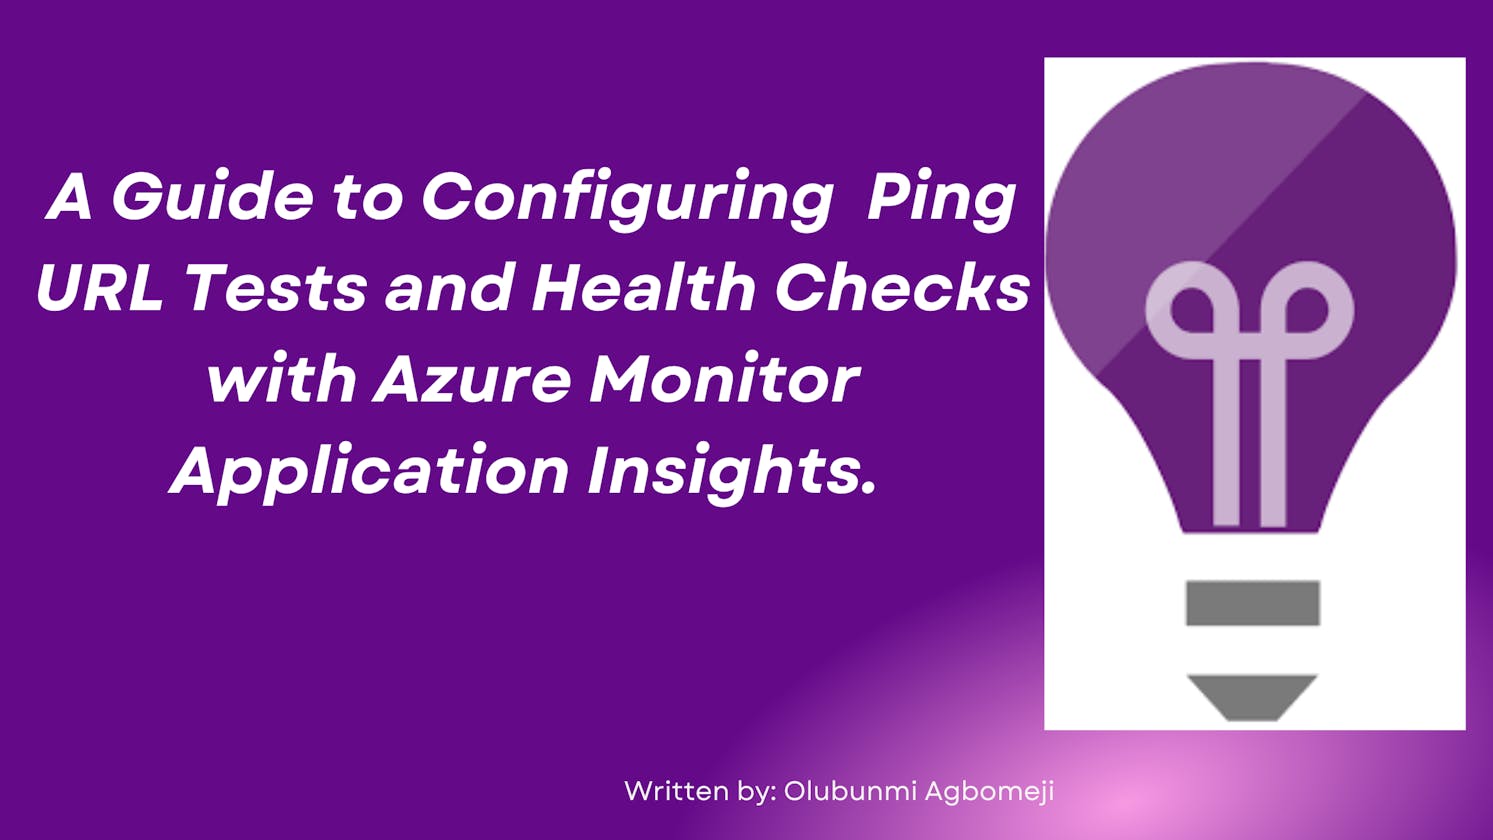 A Guide to Configuring  Ping URL Tests and Health Checks with Azure Monitor Application Insights.